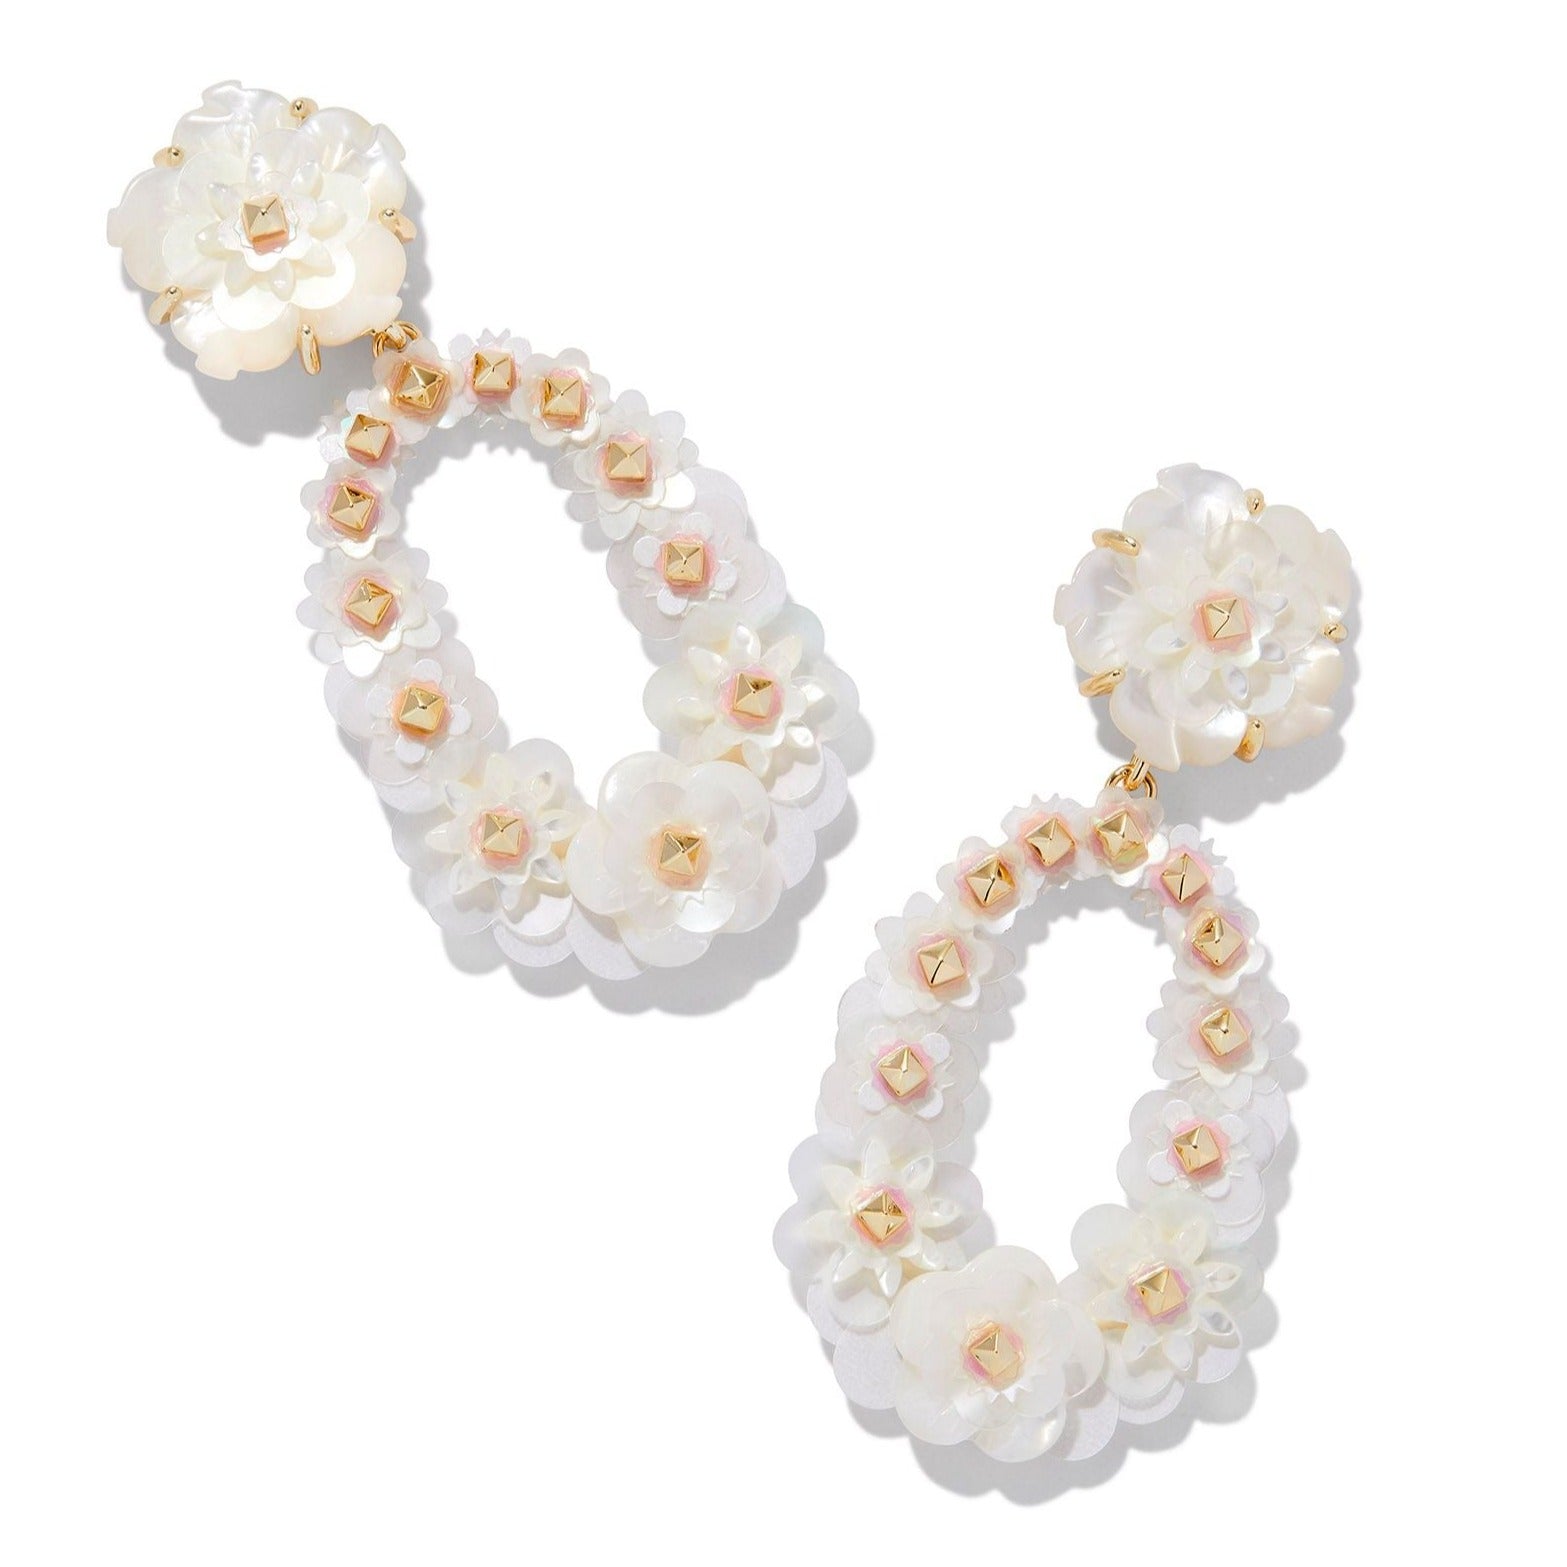 Kendra Scott | Deliah Gold Statement Earrings in Iridescent White Mix - Giddy Up Glamour Boutique